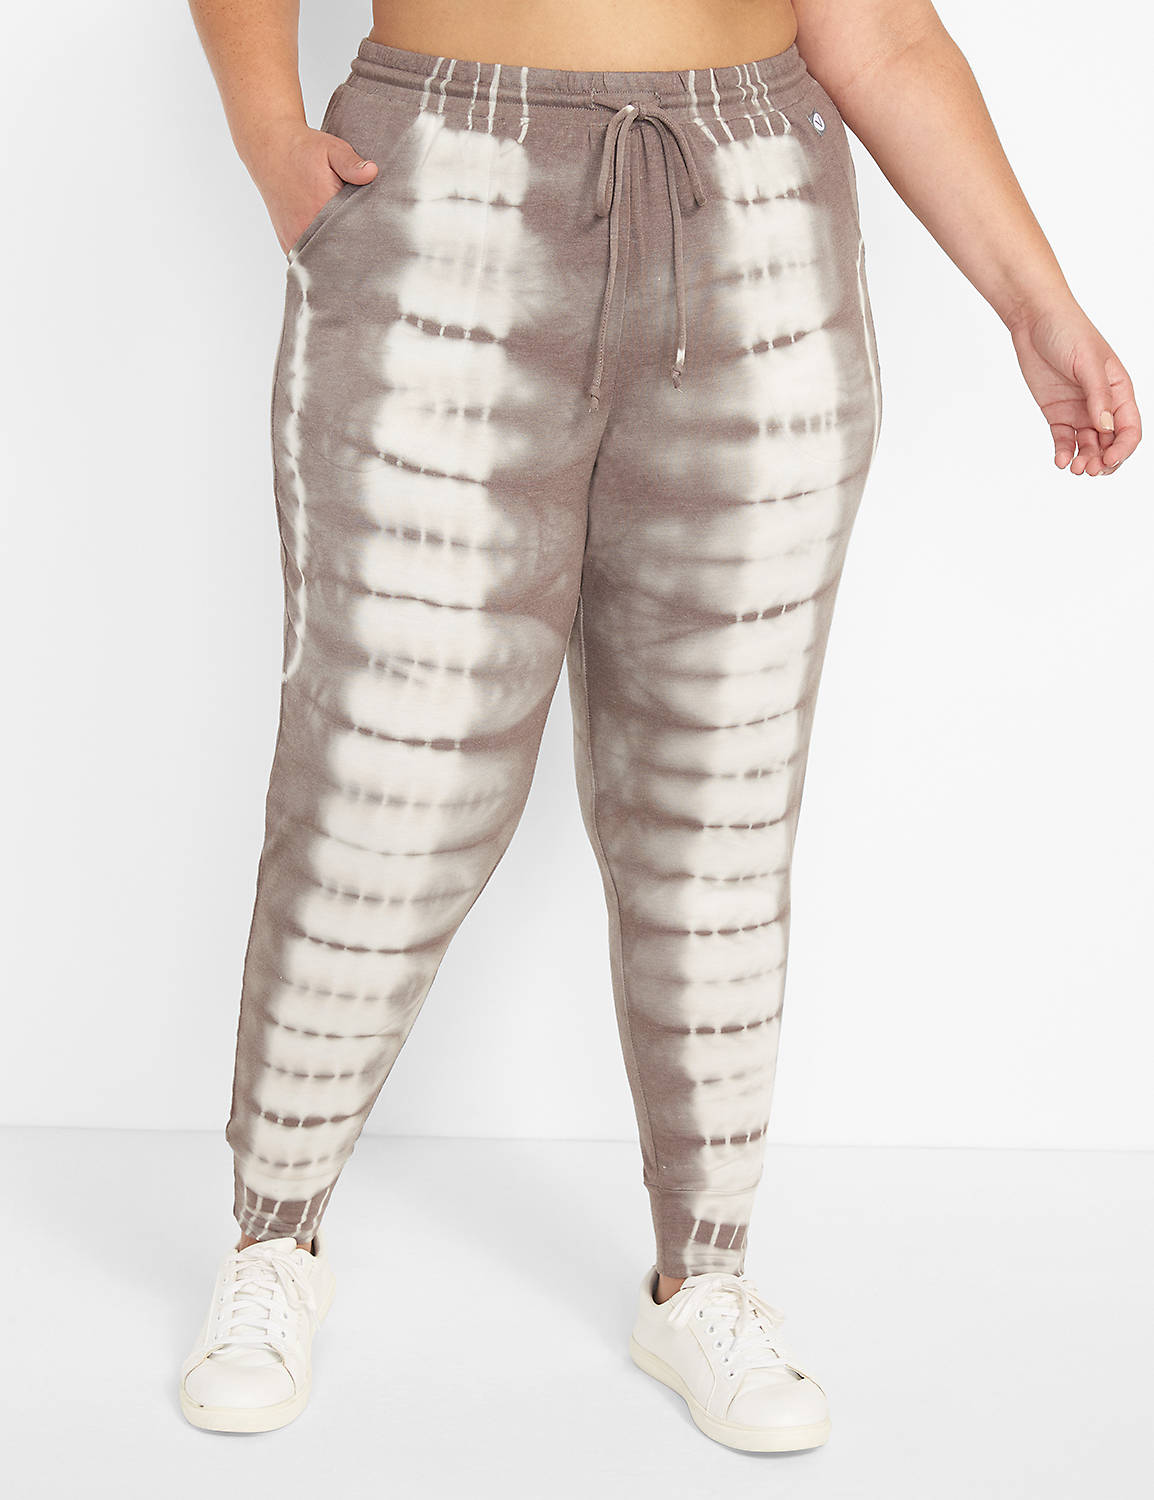 LIVI French Terry Jogger Product Image 1